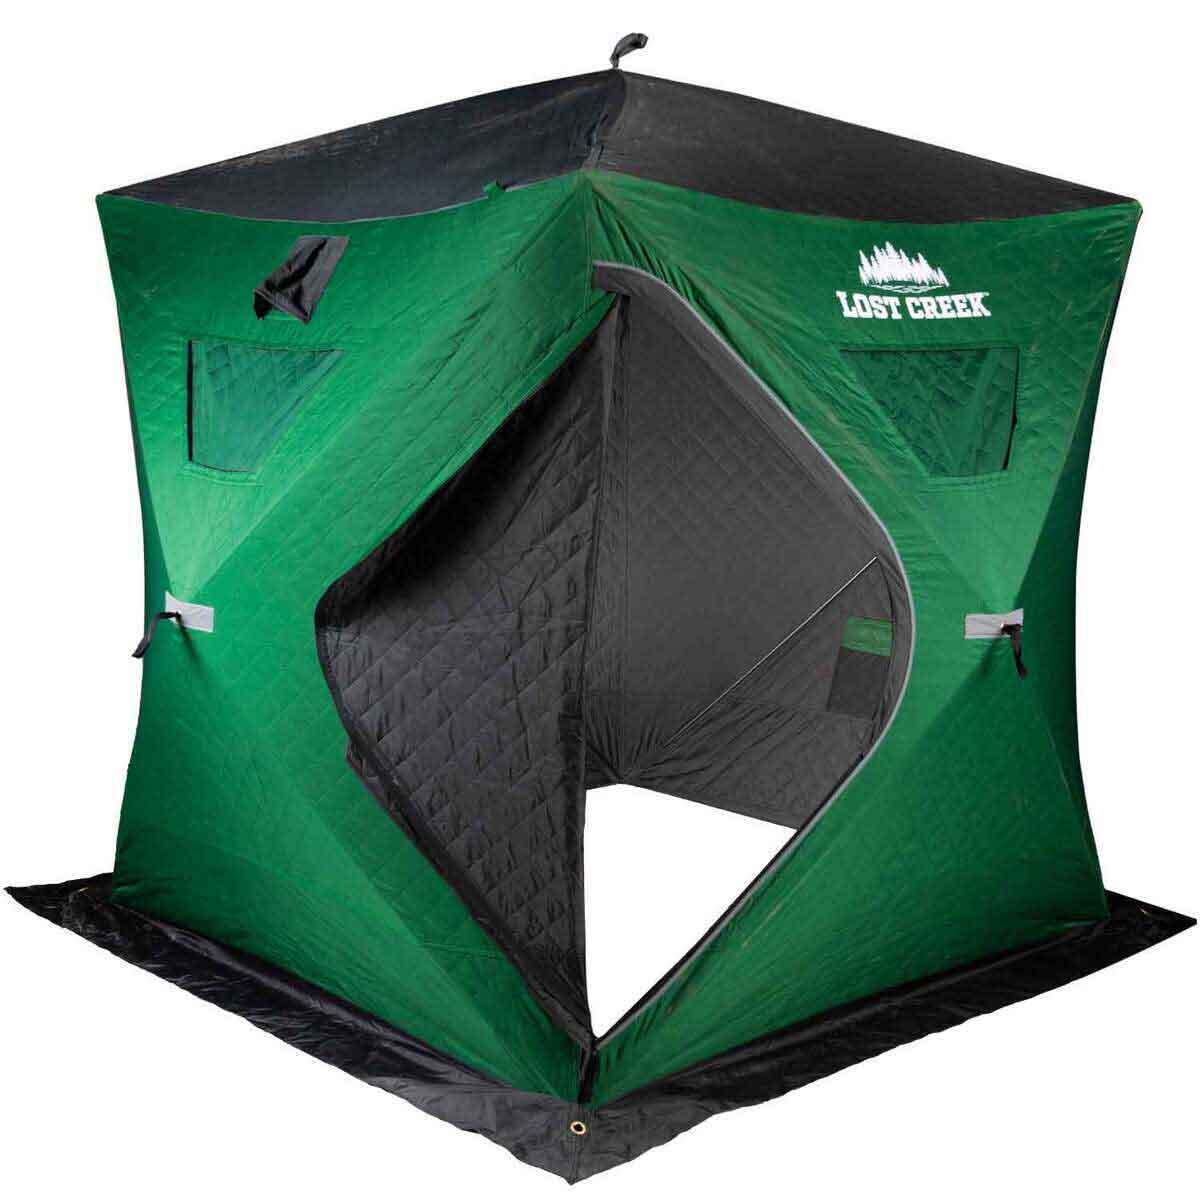 Lost Creek Gale Force 3-Man Thermal Hub Ice Fishing Shelter - Green by Sportsman's Warehouse